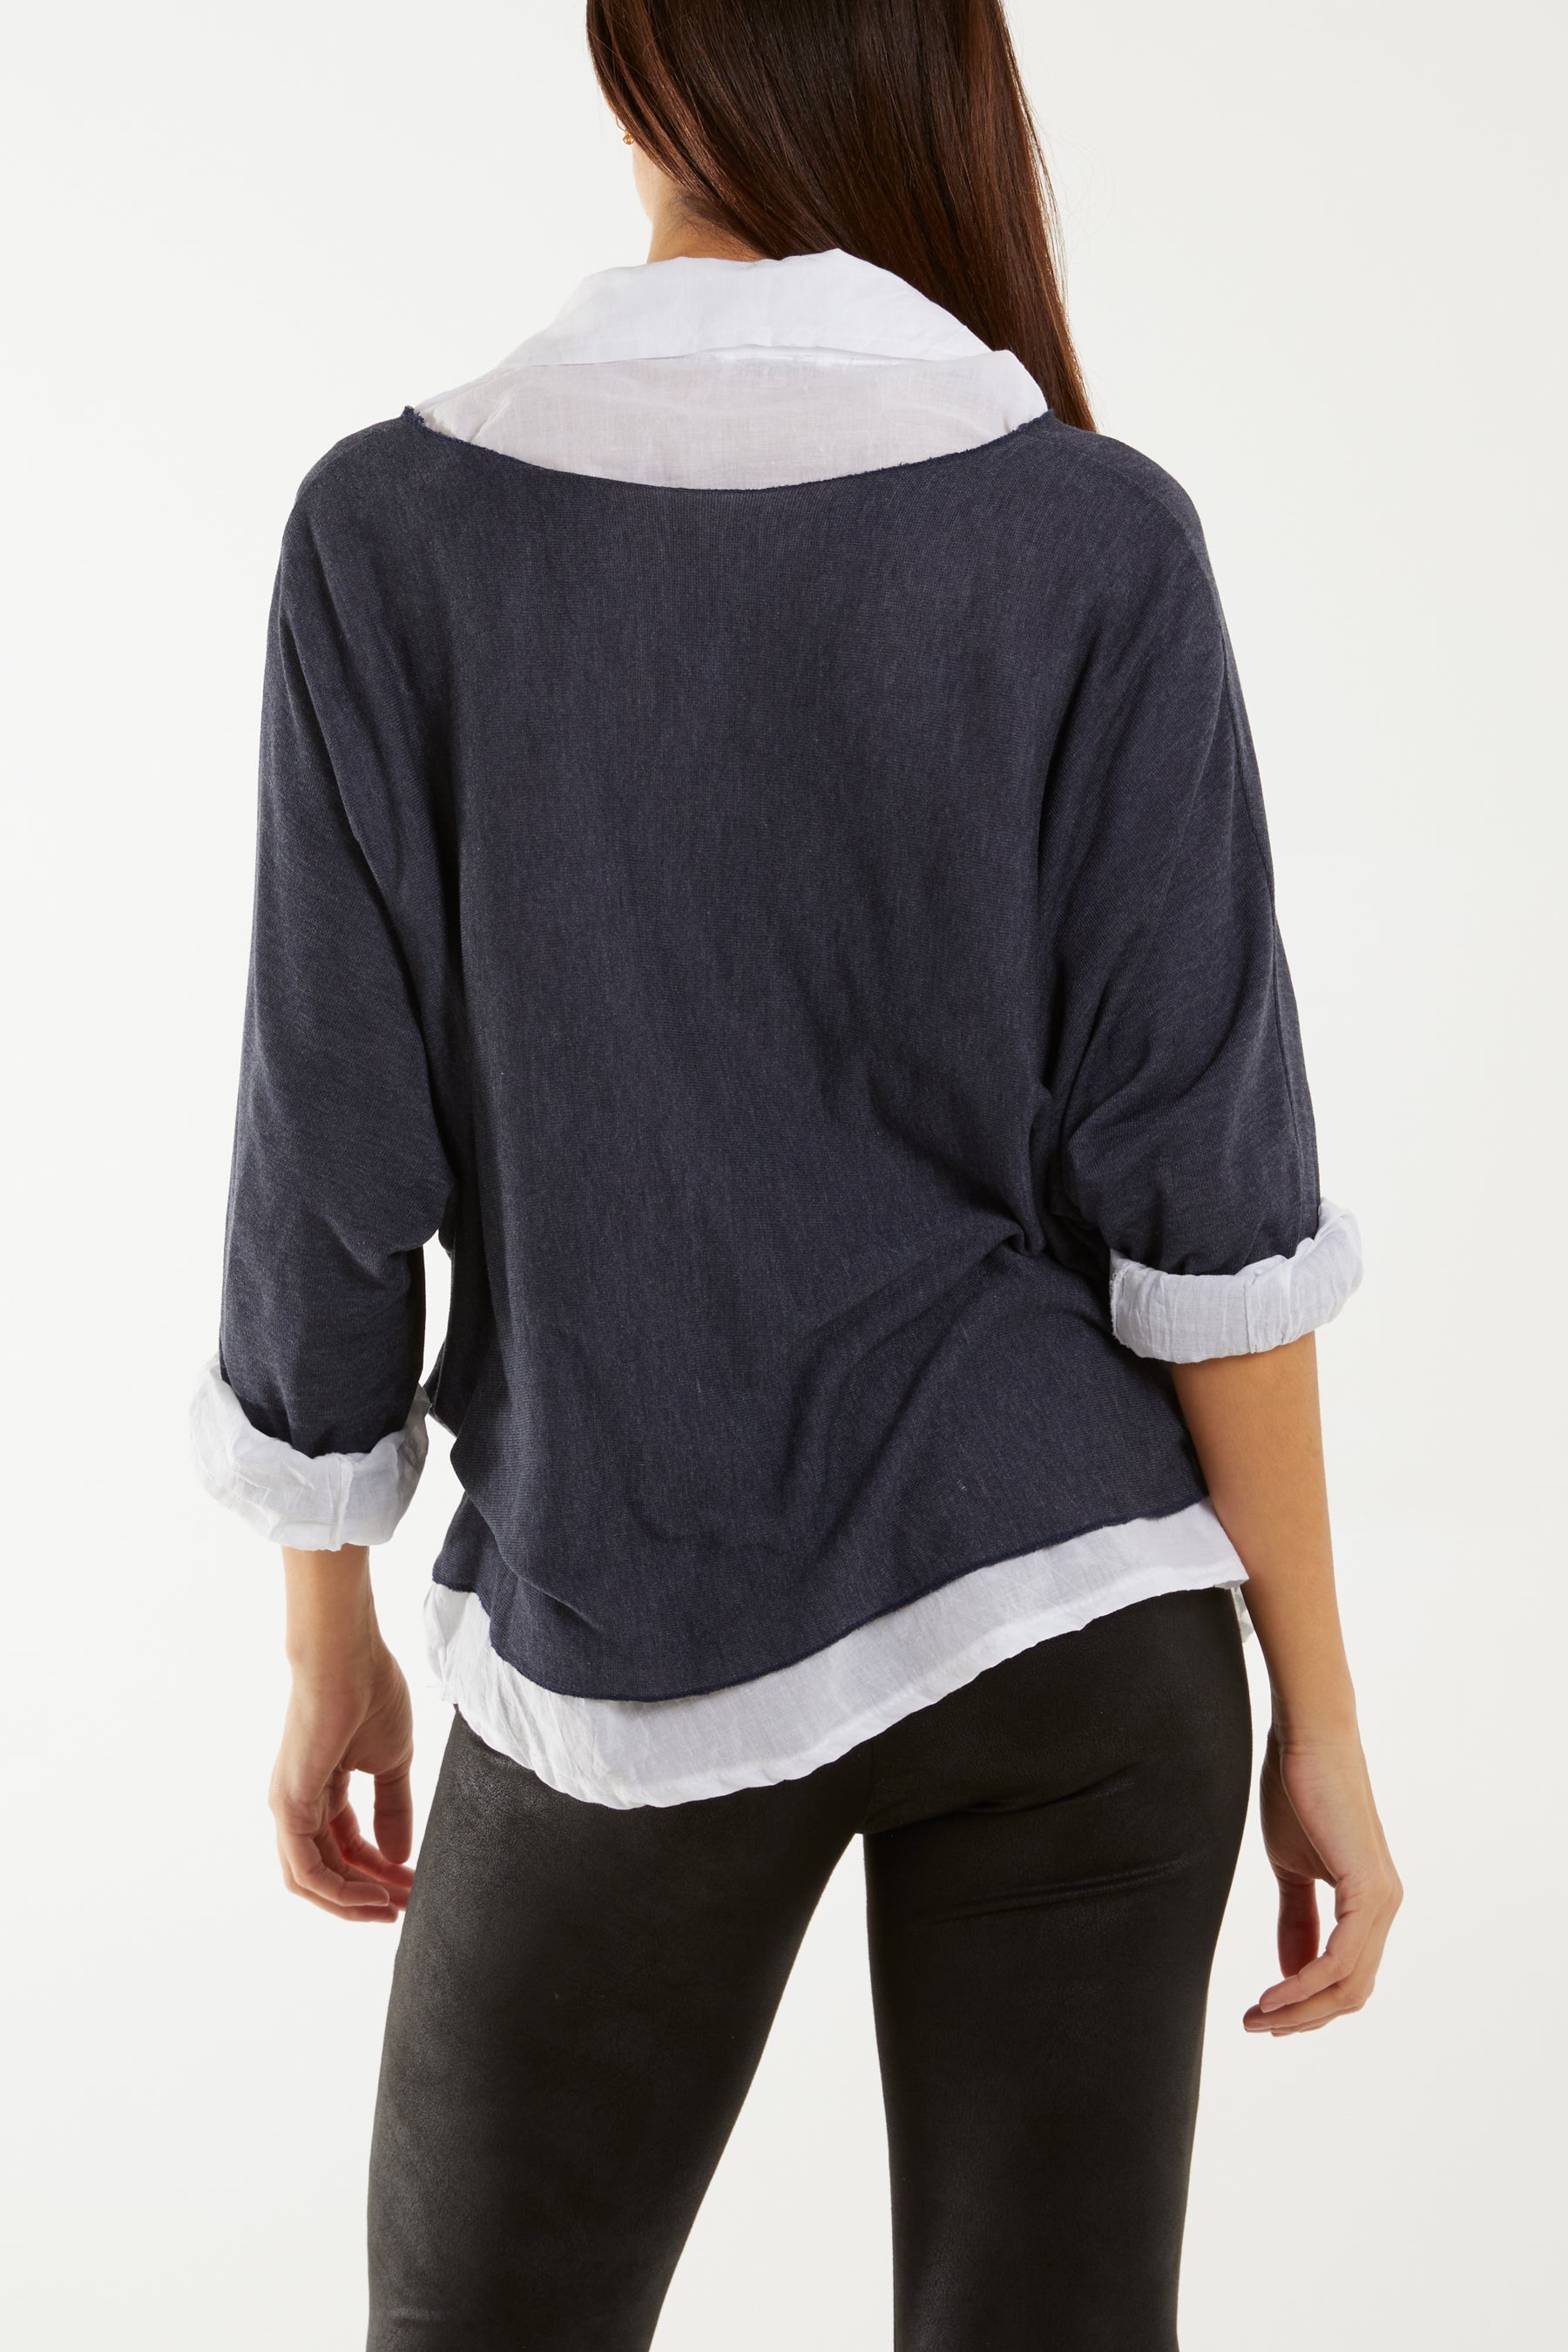 Double Layer Fine Knit and Cotton Shirt